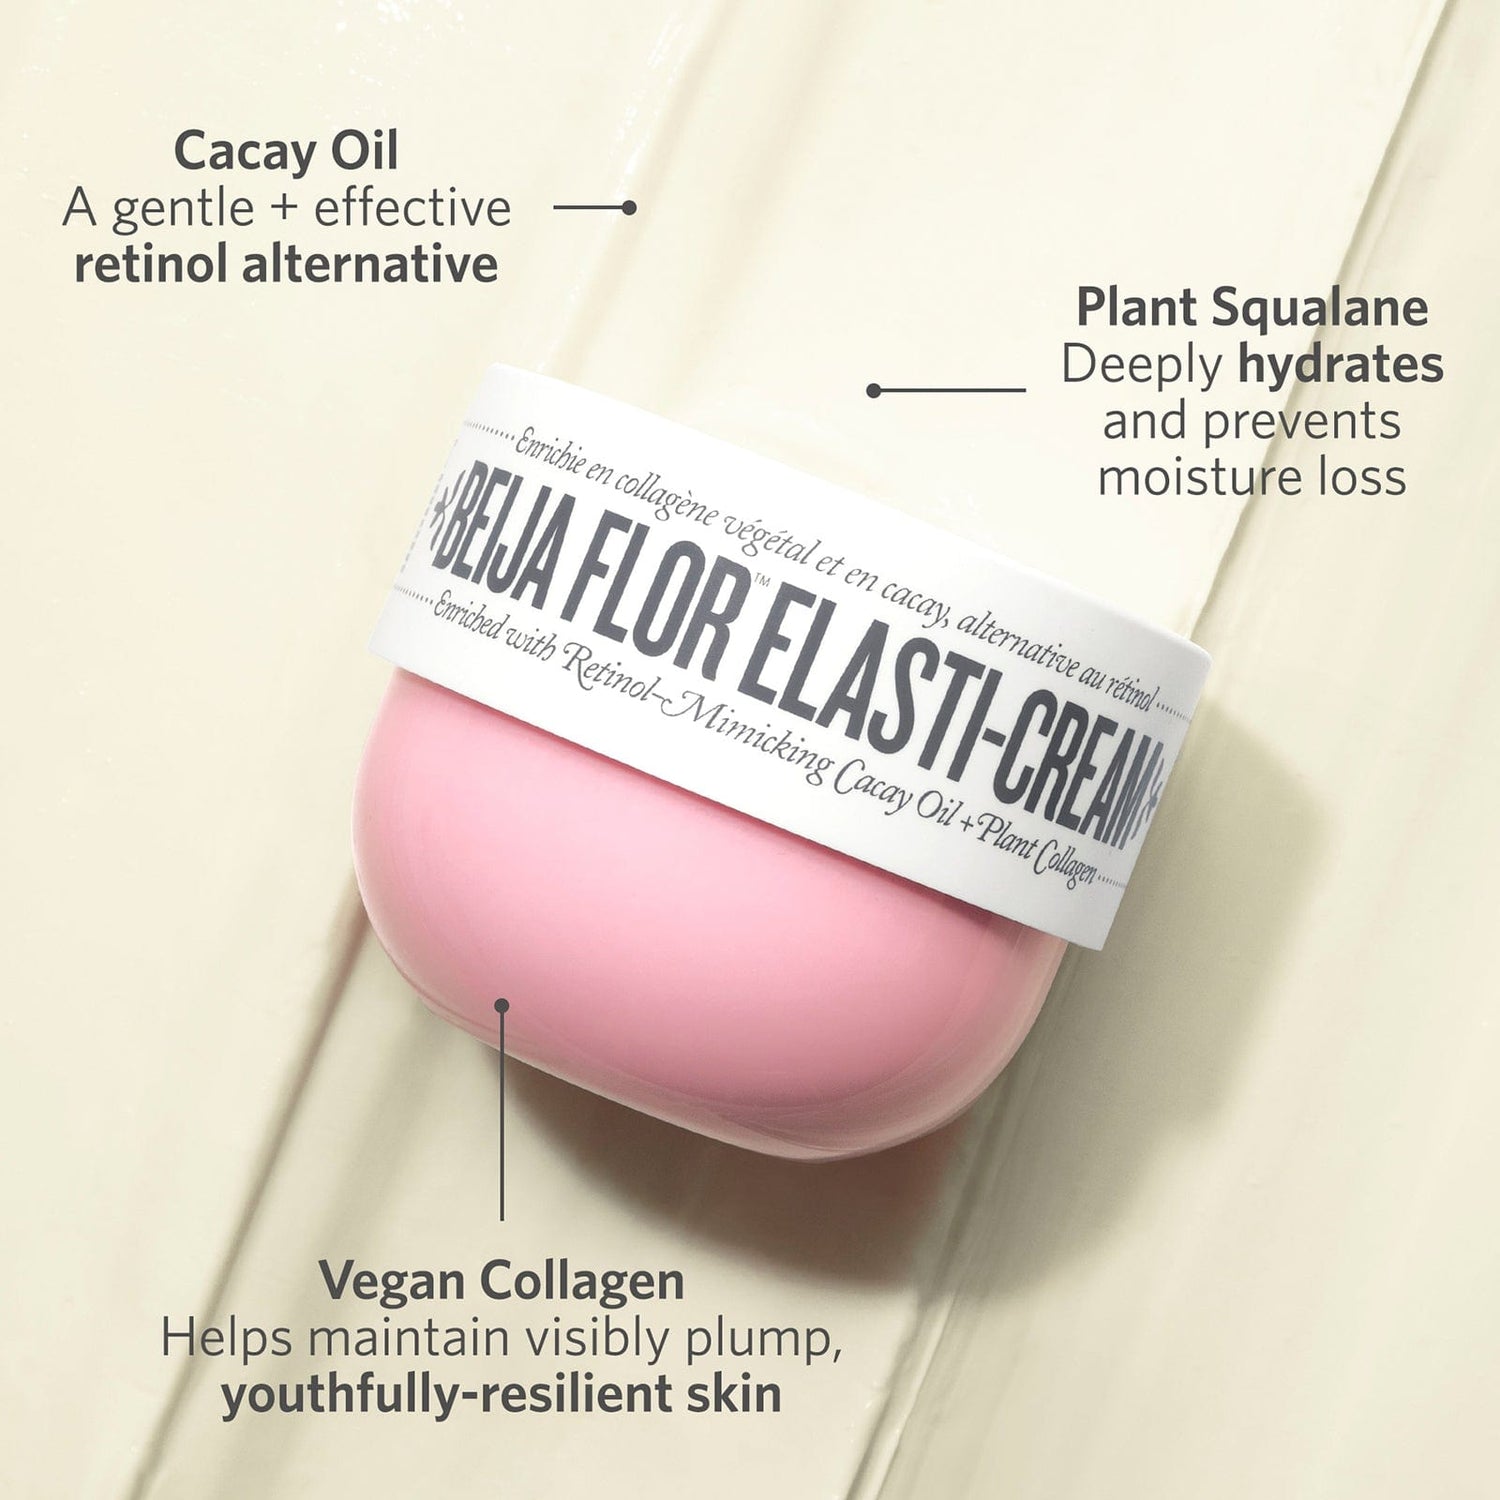 Cacay oil - a gentle + effective retinol alternative. Plant squalane deeply hydrates and prevents moisture loss. Vegan collagen helps maintain visibly plump, youthfully-resilient skin